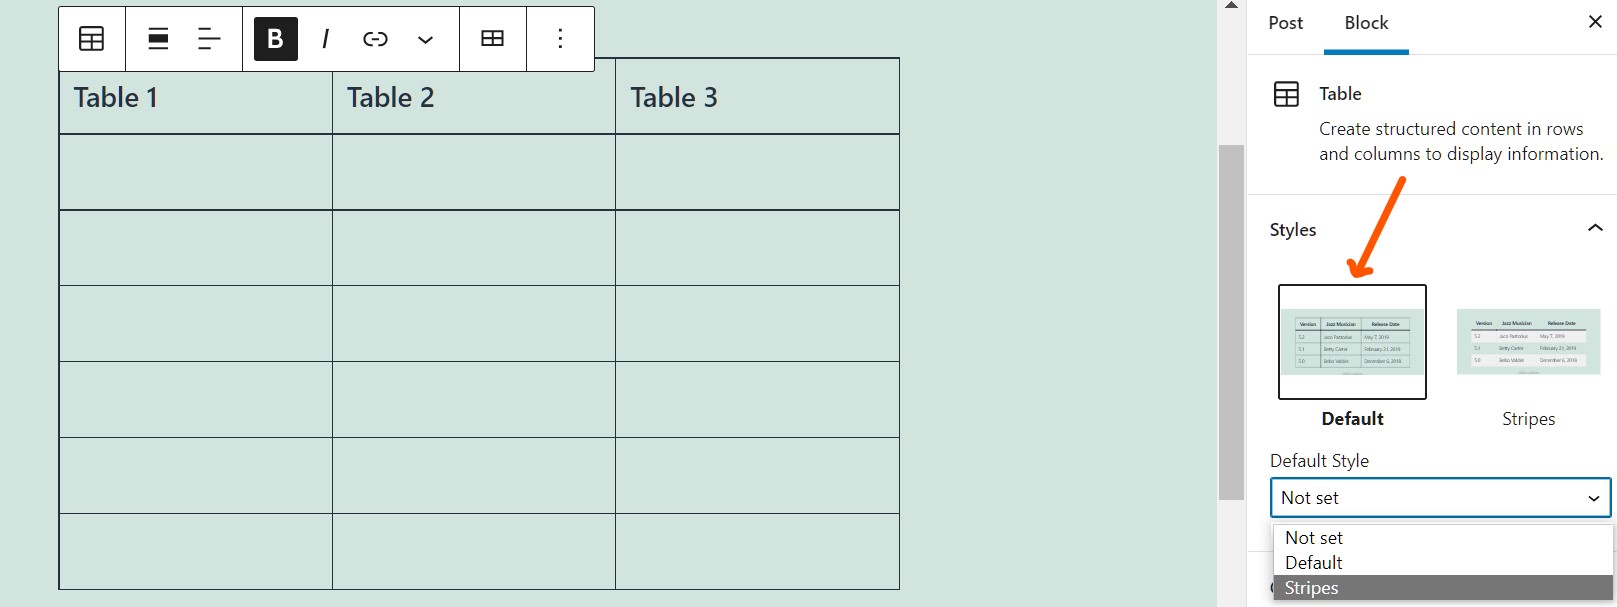 How To Create Tables In WordPress